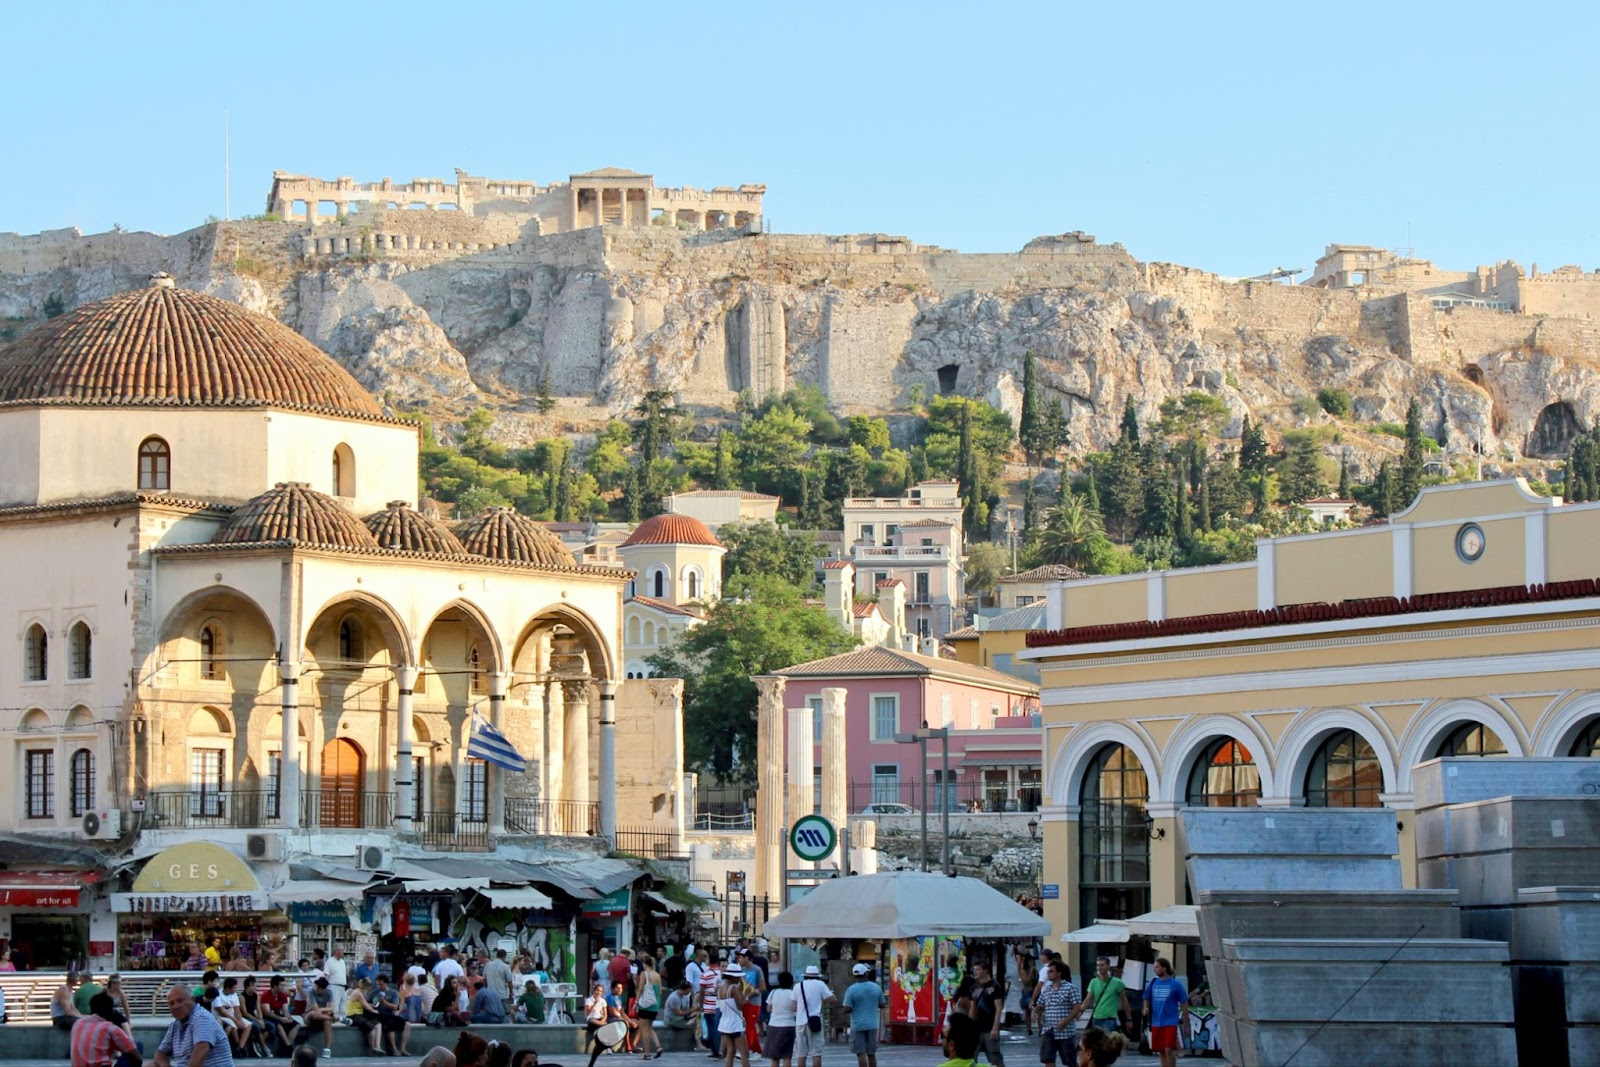 There are less crowds in Greece during the fall. 
pictured: Athens Greece with crowds